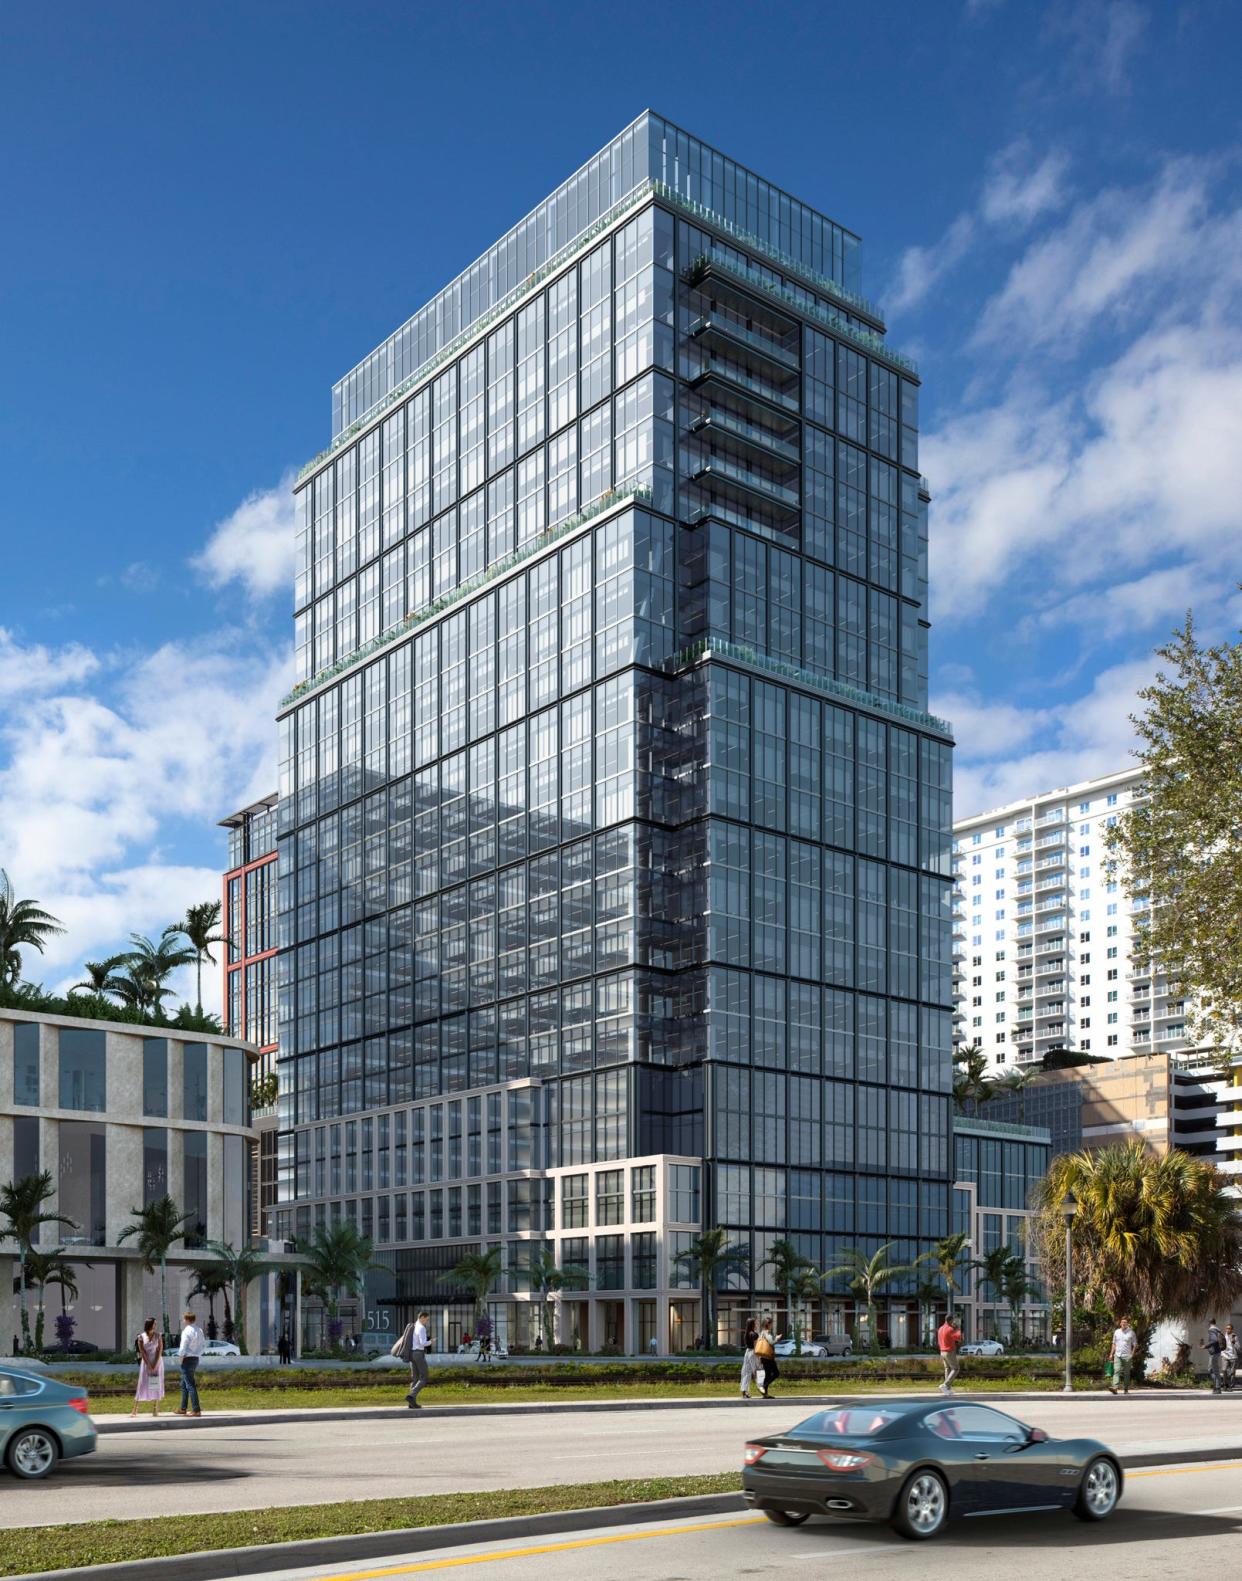 515 Fern, a new proposed office tower for The Square.